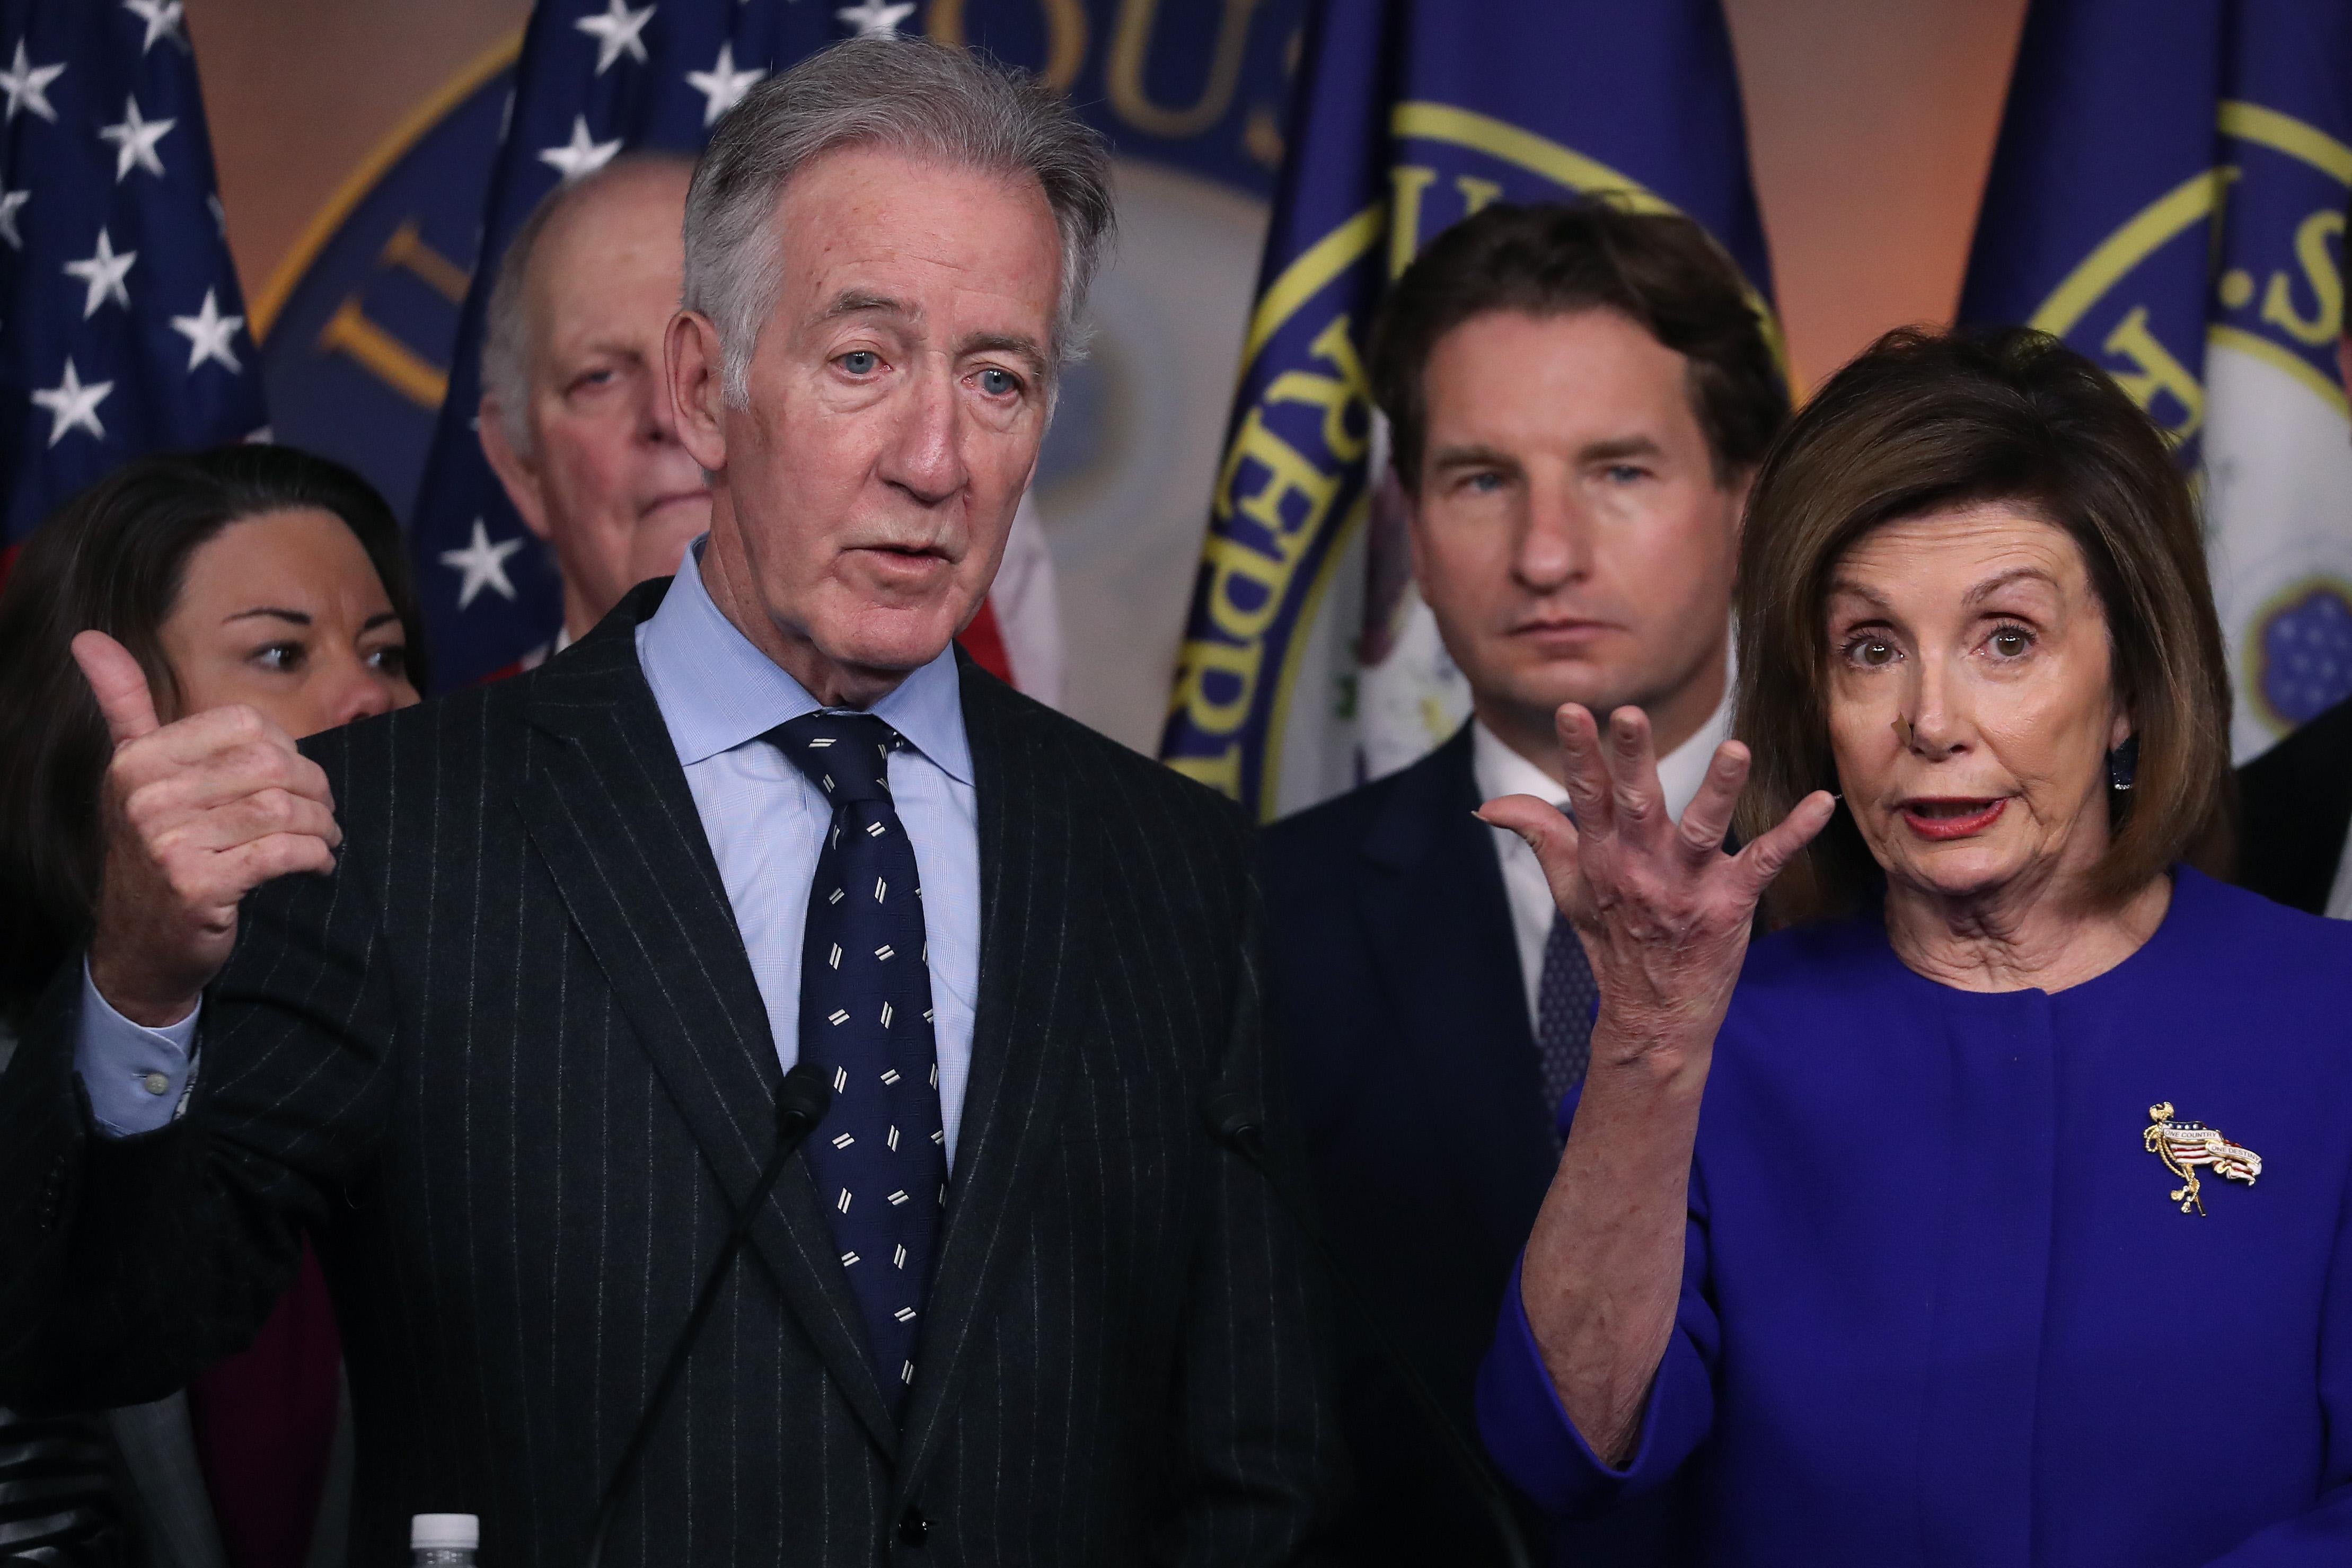 Richard Neal gestures from behind a podium with Nancy Pelosi and other House Democrats beside him.